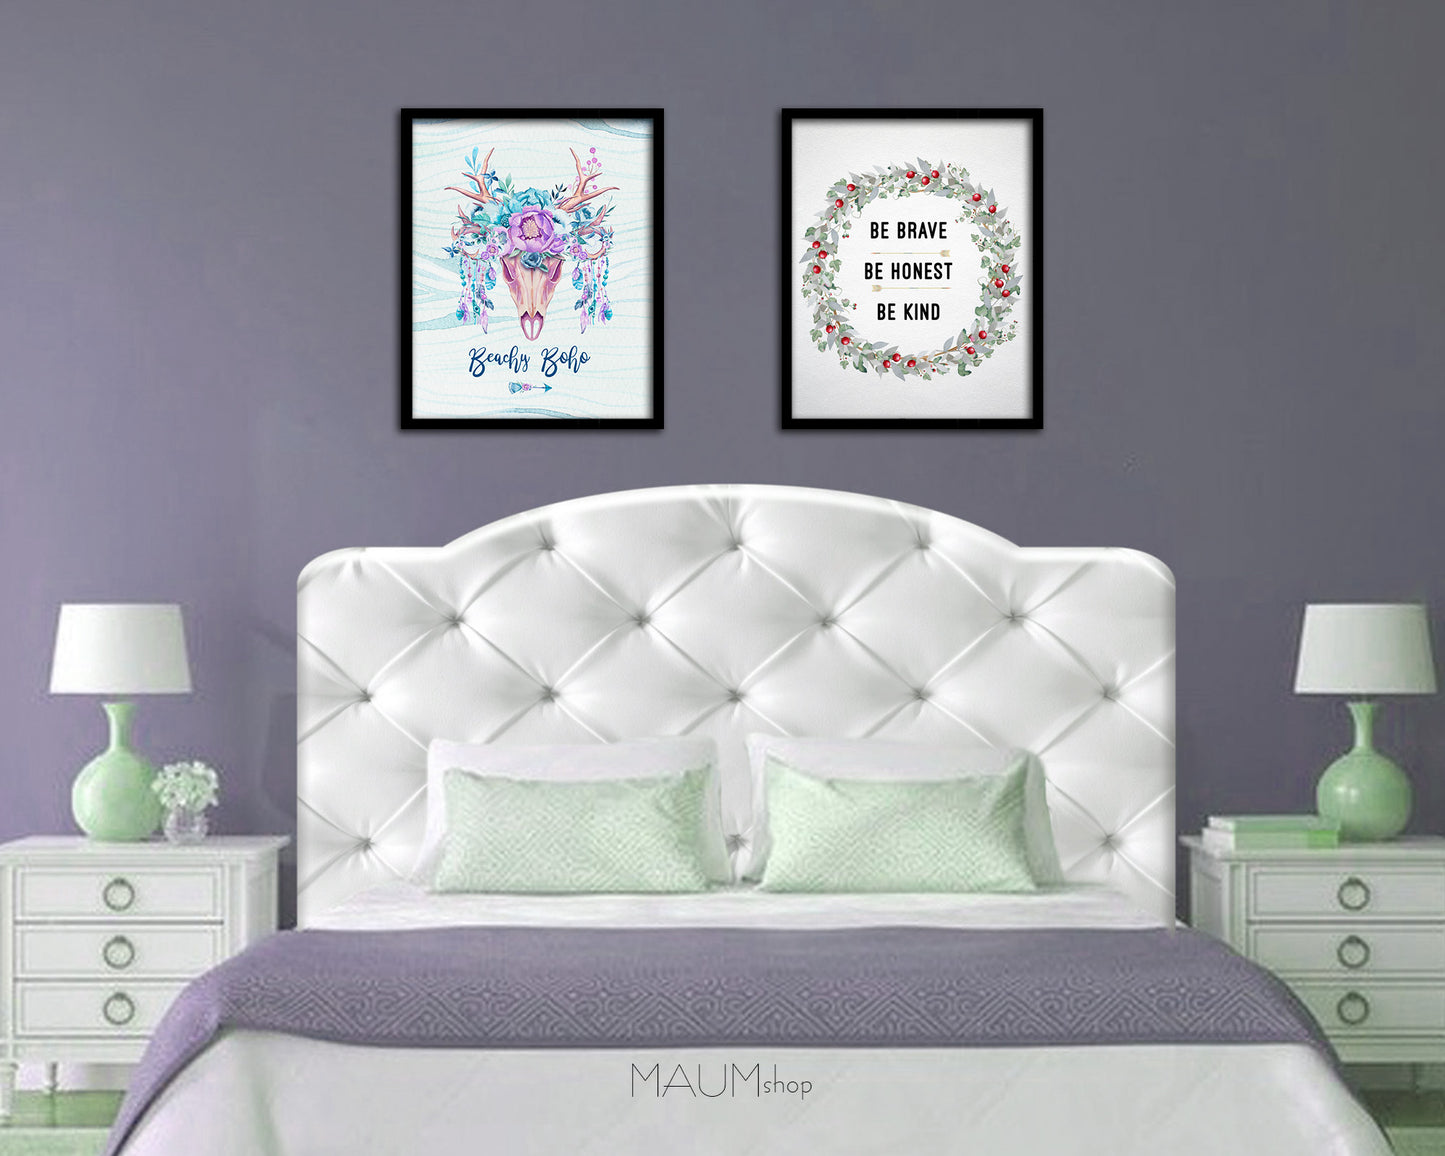 Be brave be honest be kind Quote Framed Print Wall Decor Art Gifts